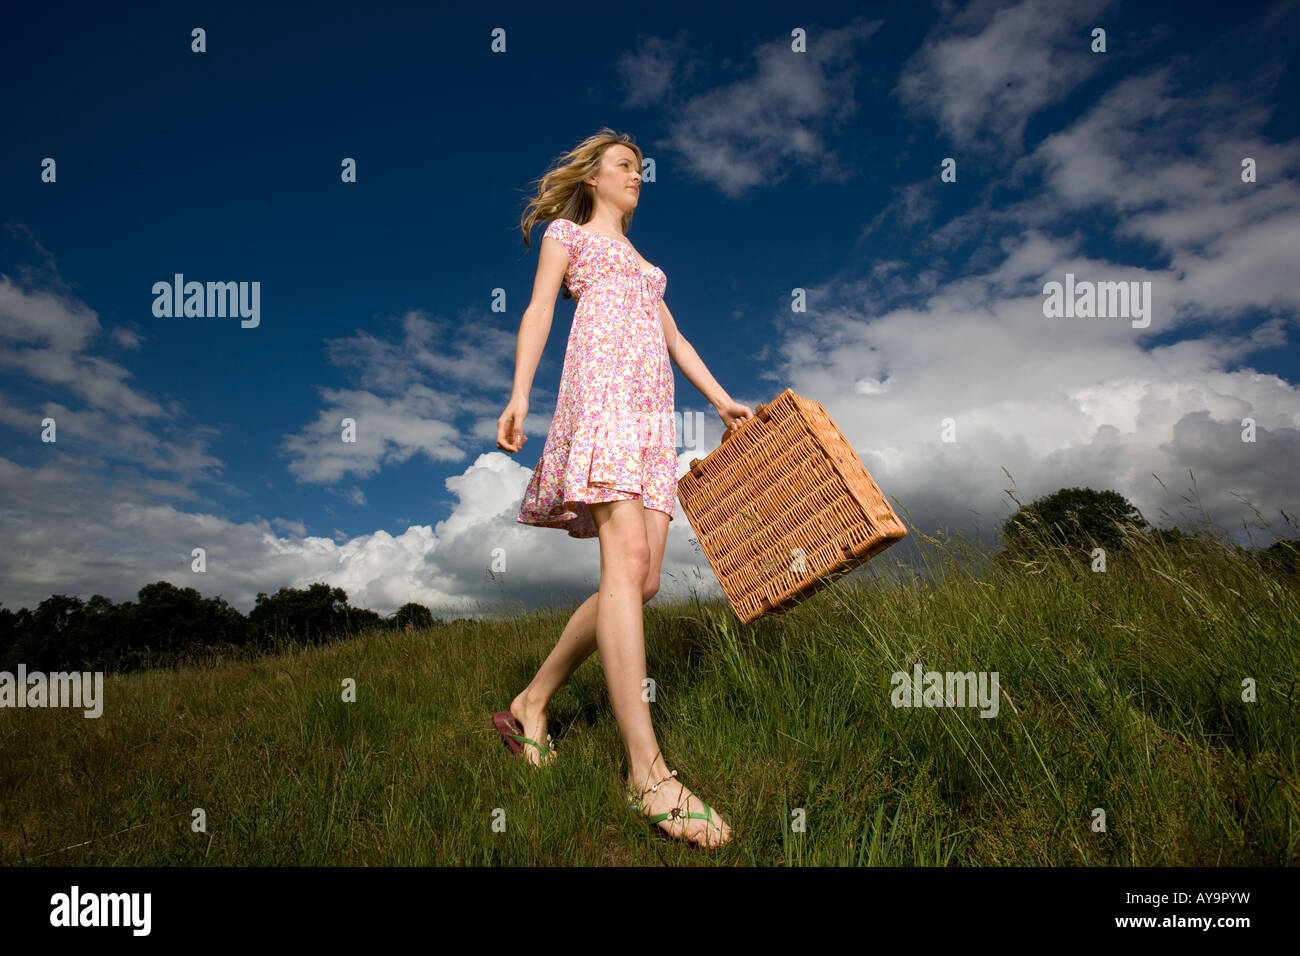 Woman on summer picnic with hamper Stock Photo